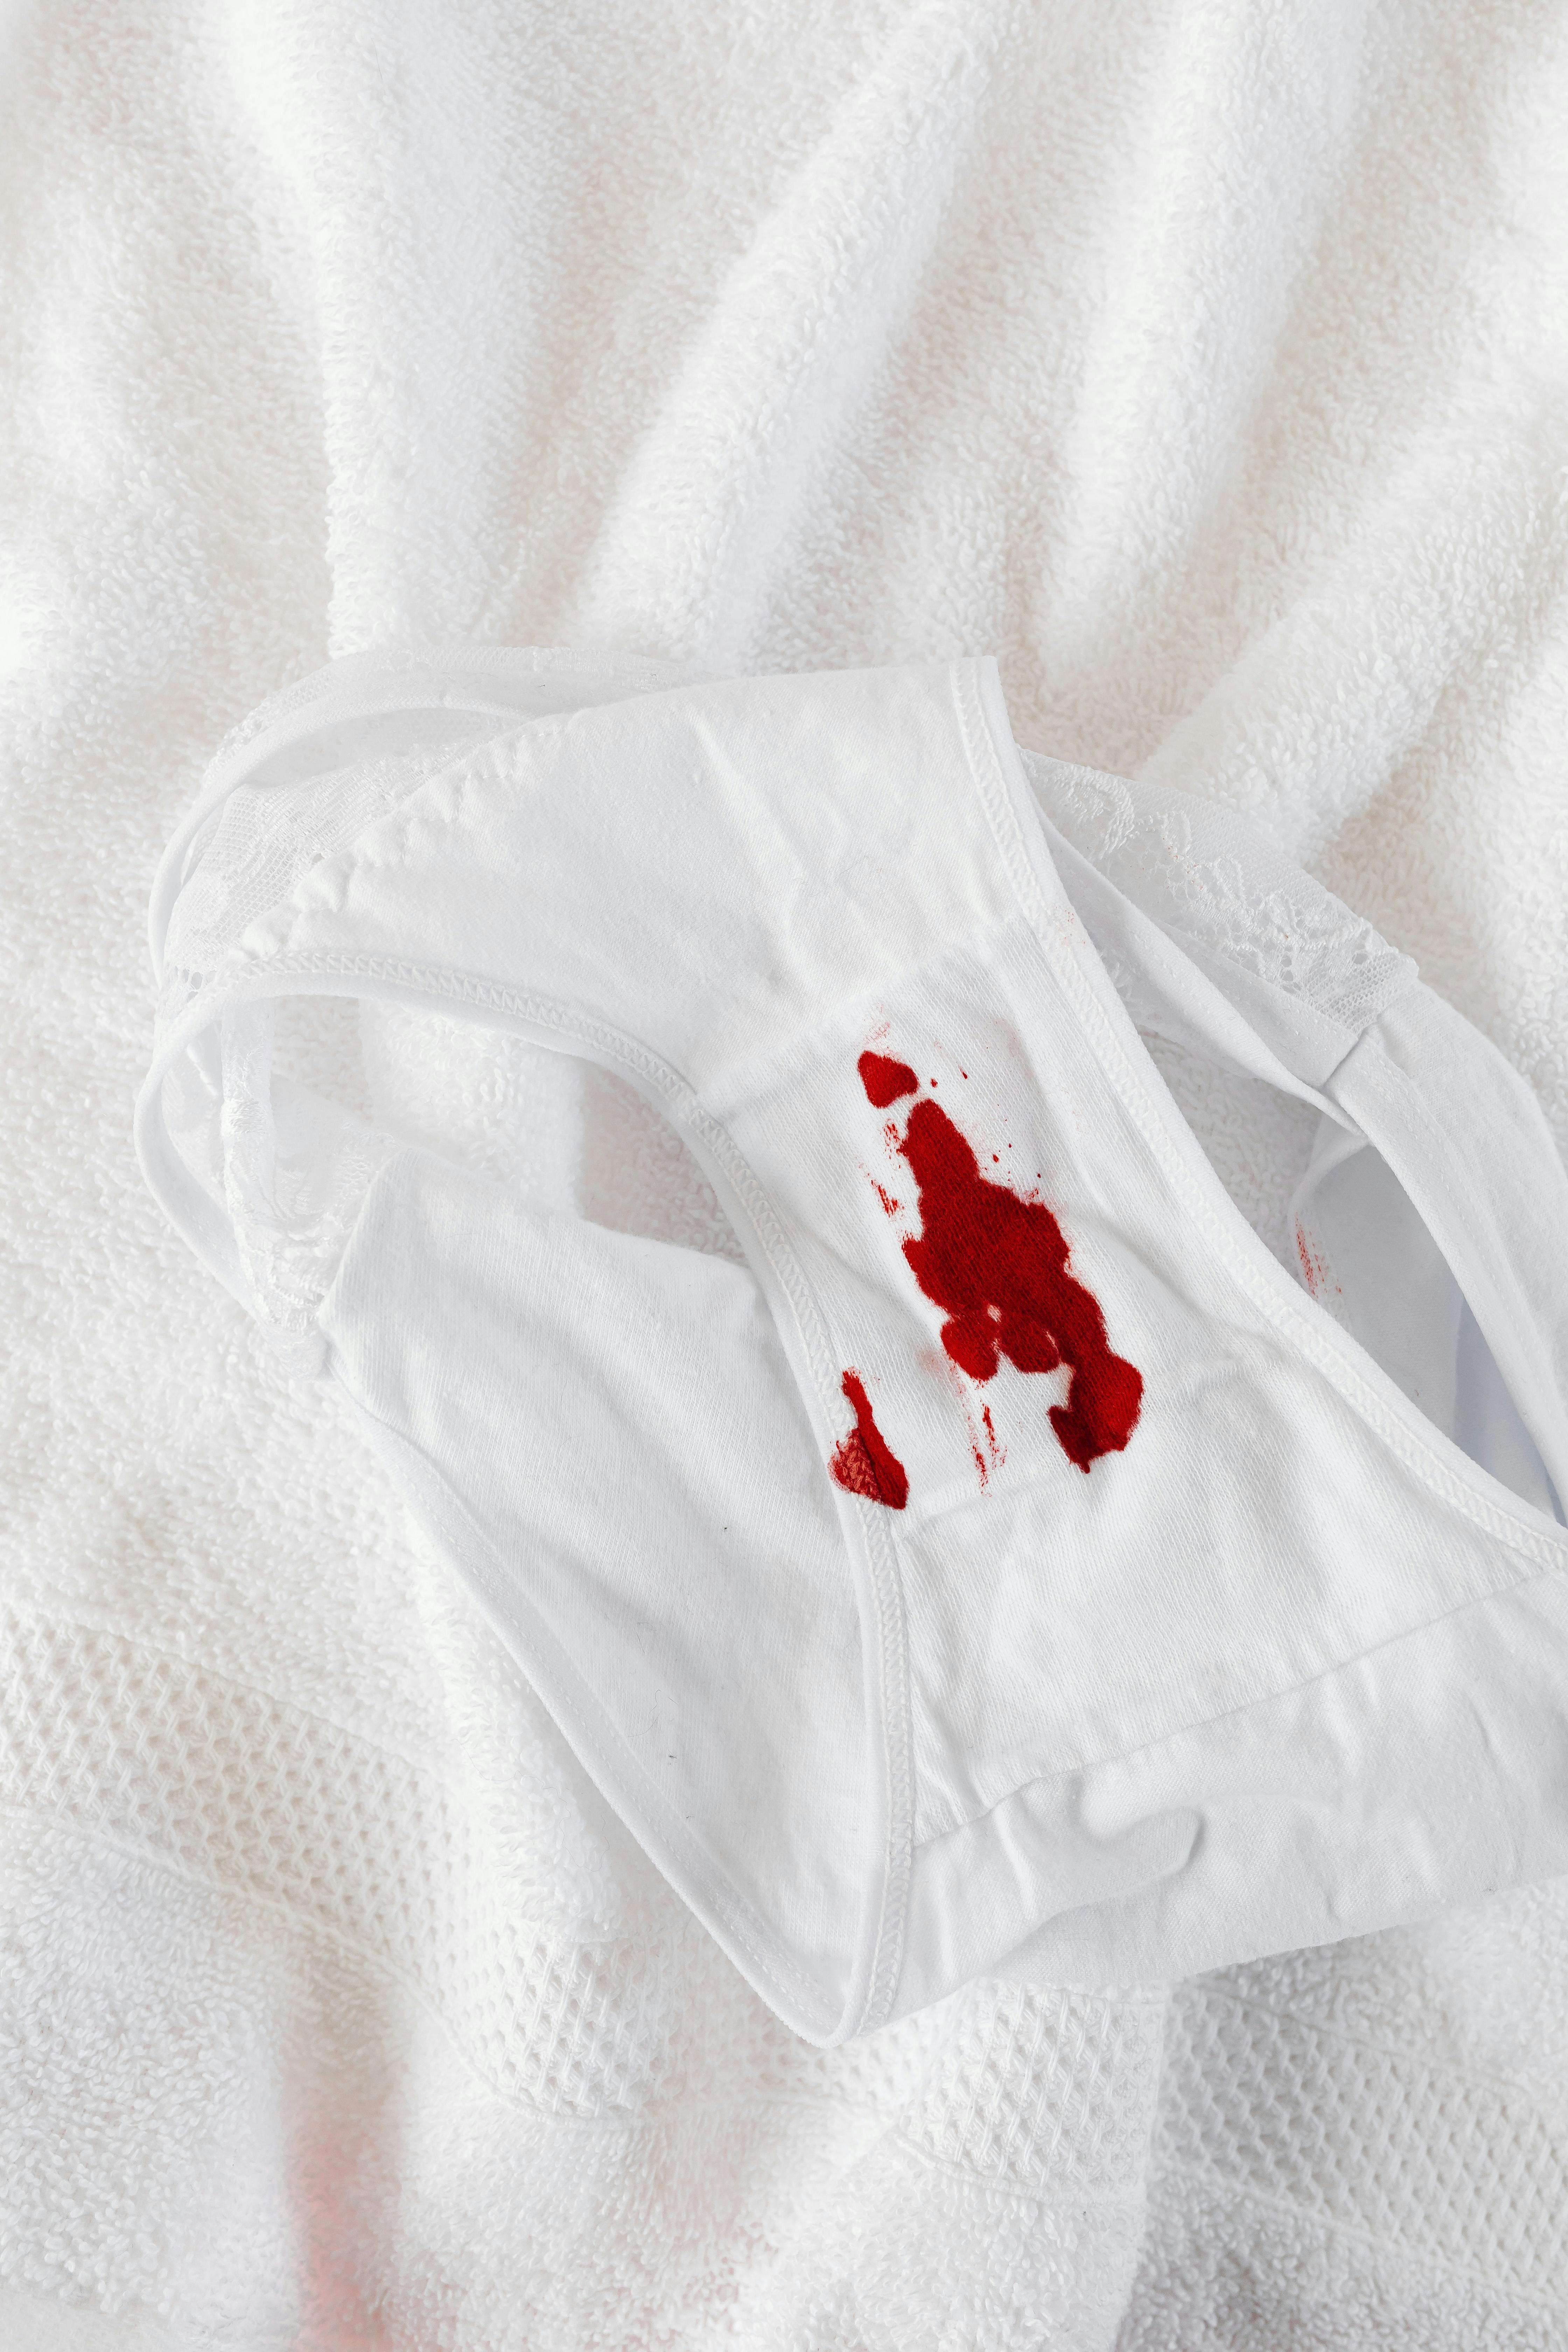 Close-up Shot of a Panty with Blood · Free Stock Photo